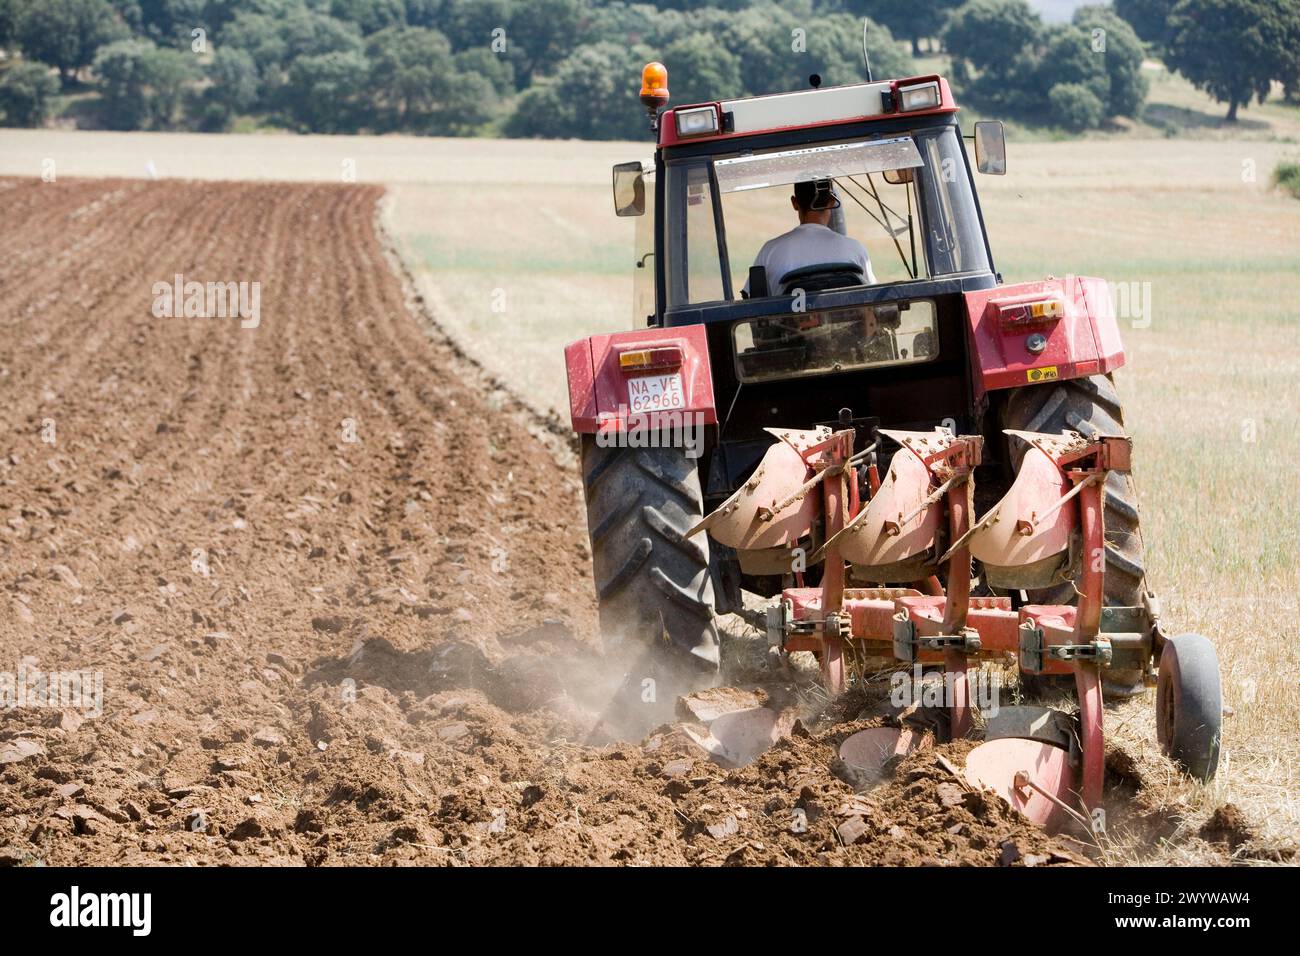 Agricultural machinery. Tractor ploughing the land. Mouldboard plough. Harvesting of cereals, Oco (near Estella), Navarre, Spain. Stock Photo